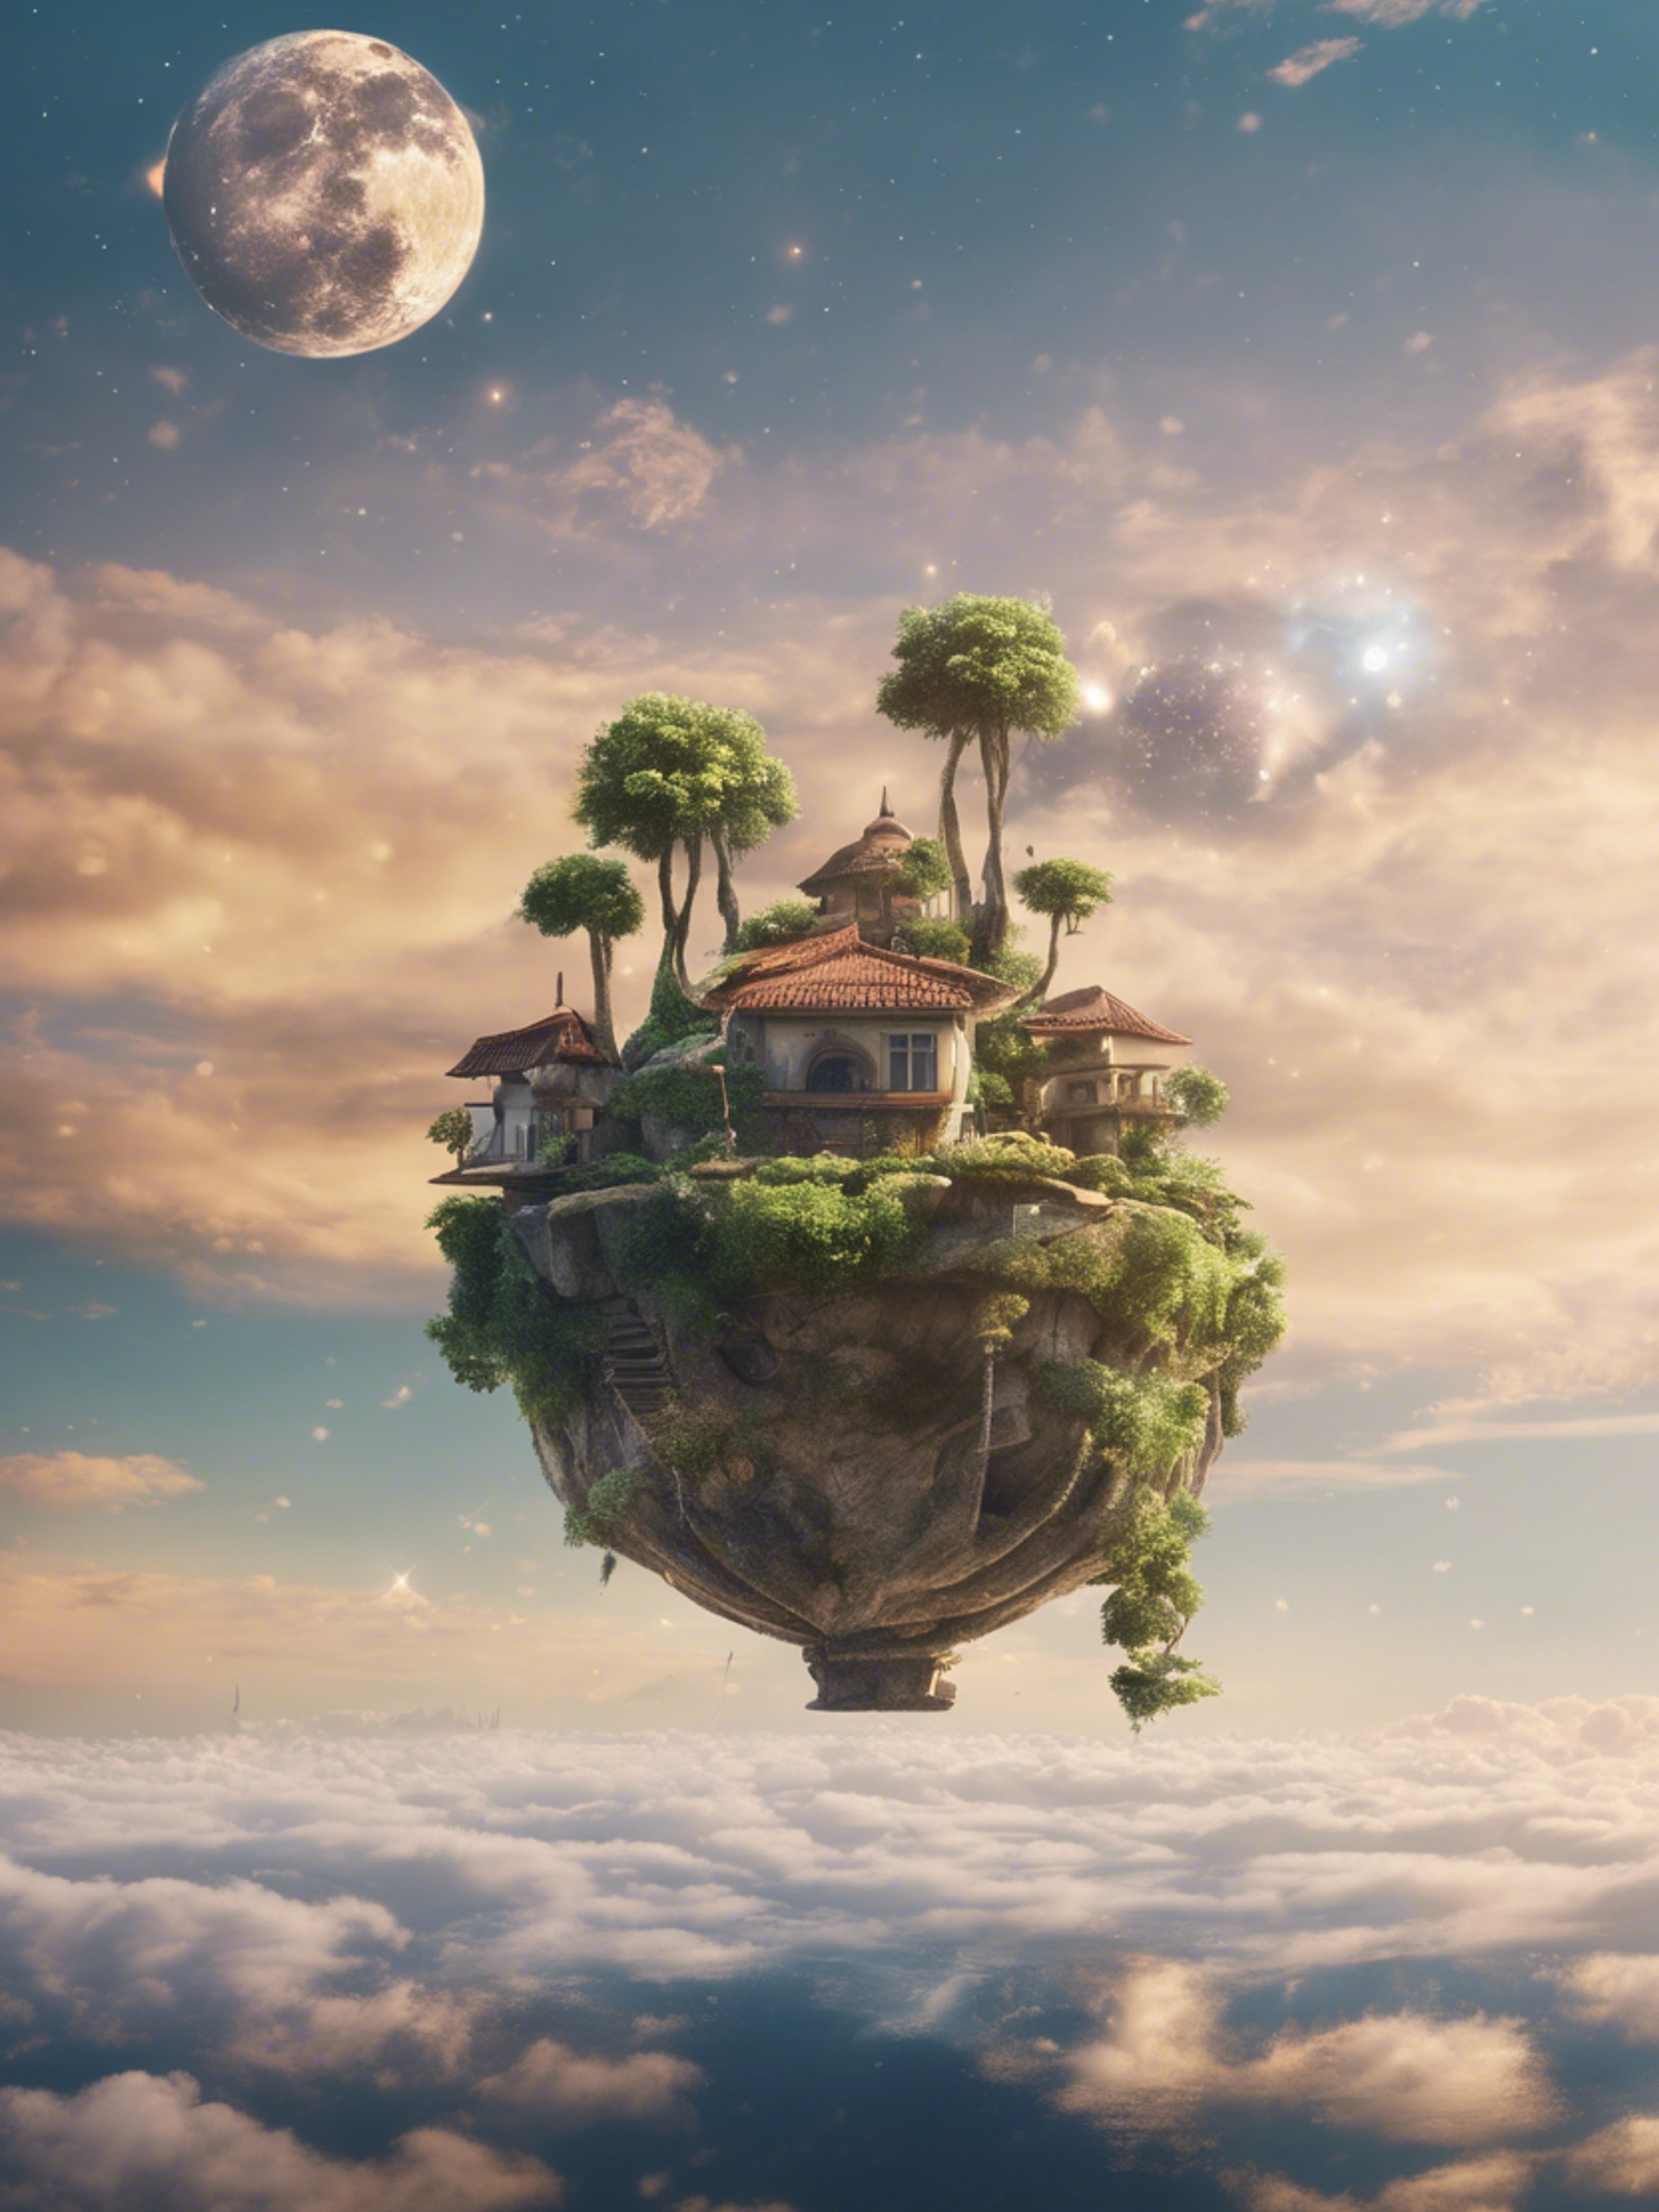 A magical realist setting with floating islands in the sky, each bearing a Scorpio emblem.壁紙[8040300e27d3401c862e]